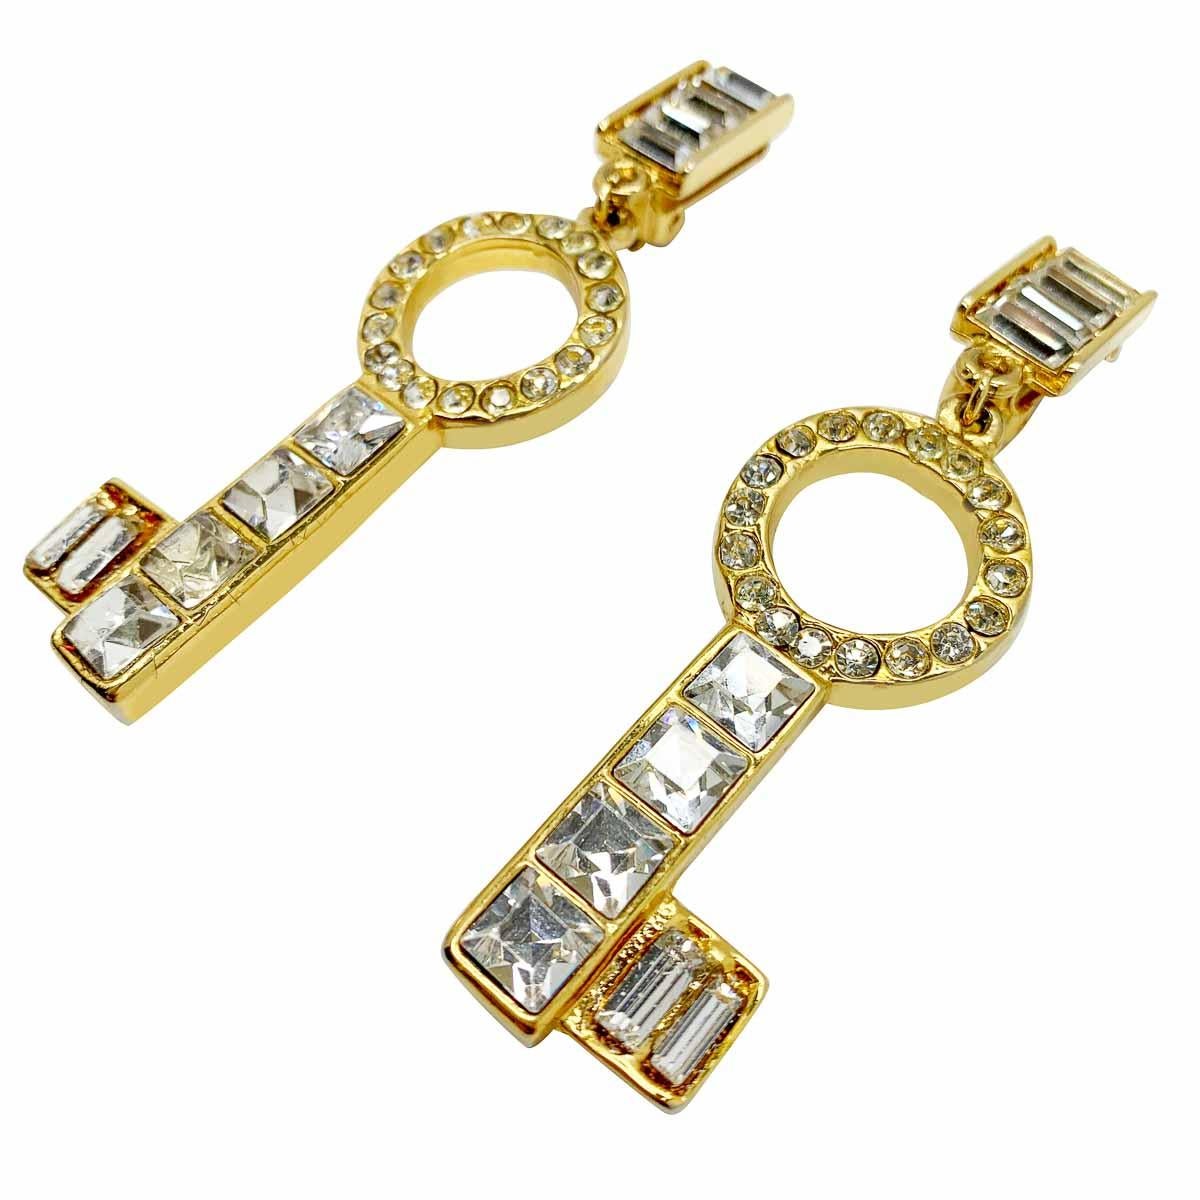 Vintage Ugo Correani Crystal Statement Key Earrings 1980s In Good Condition For Sale In Wilmslow, GB